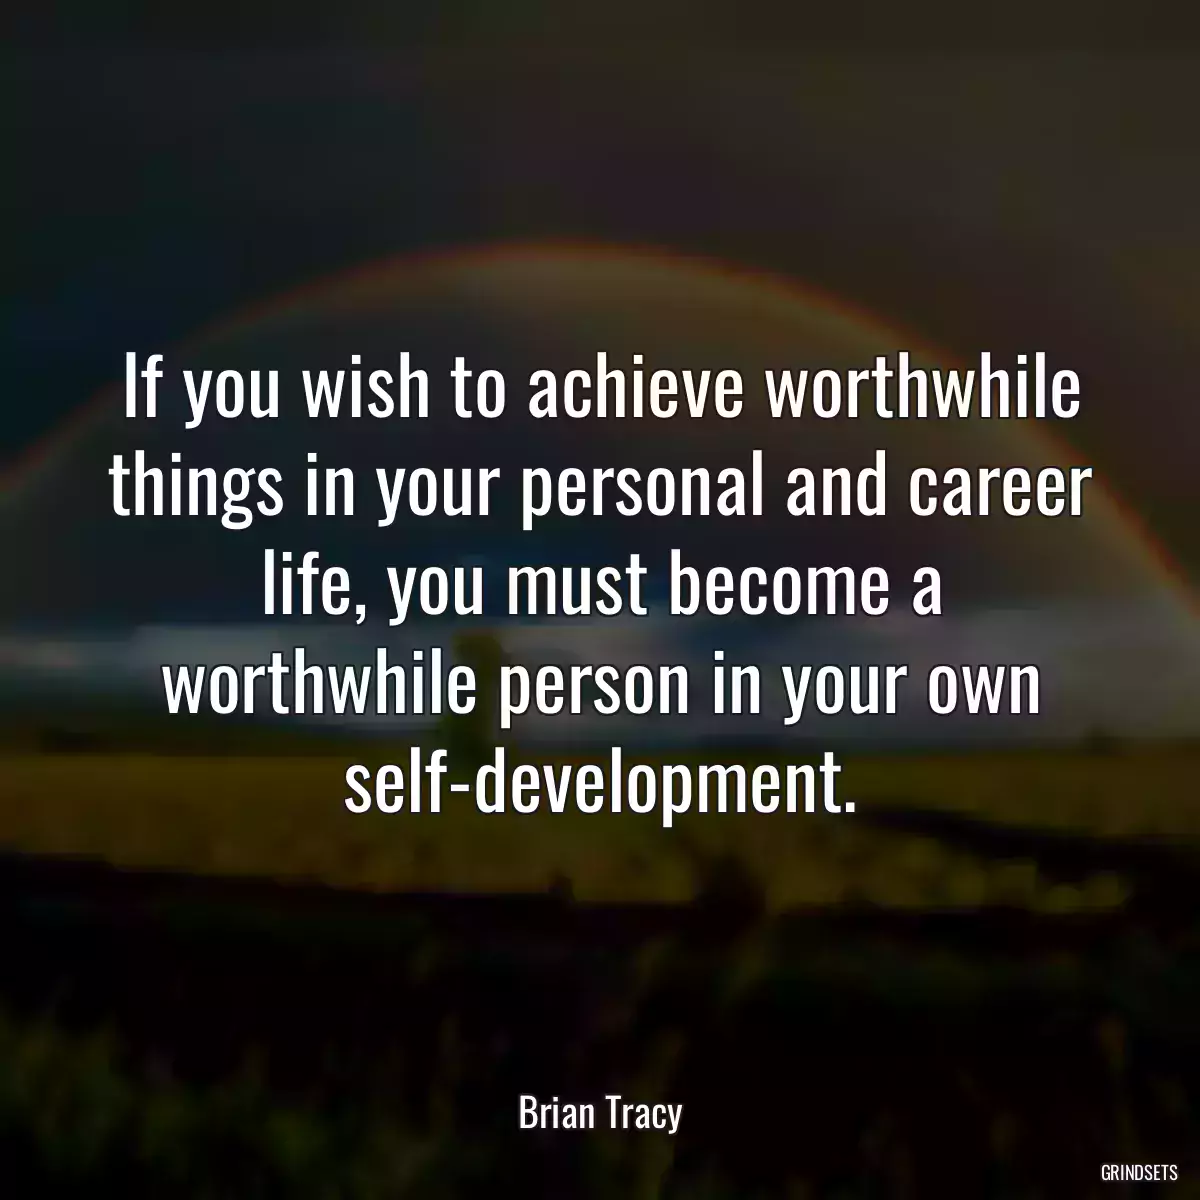 If you wish to achieve worthwhile things in your personal and career life, you must become a worthwhile person in your own self-development.